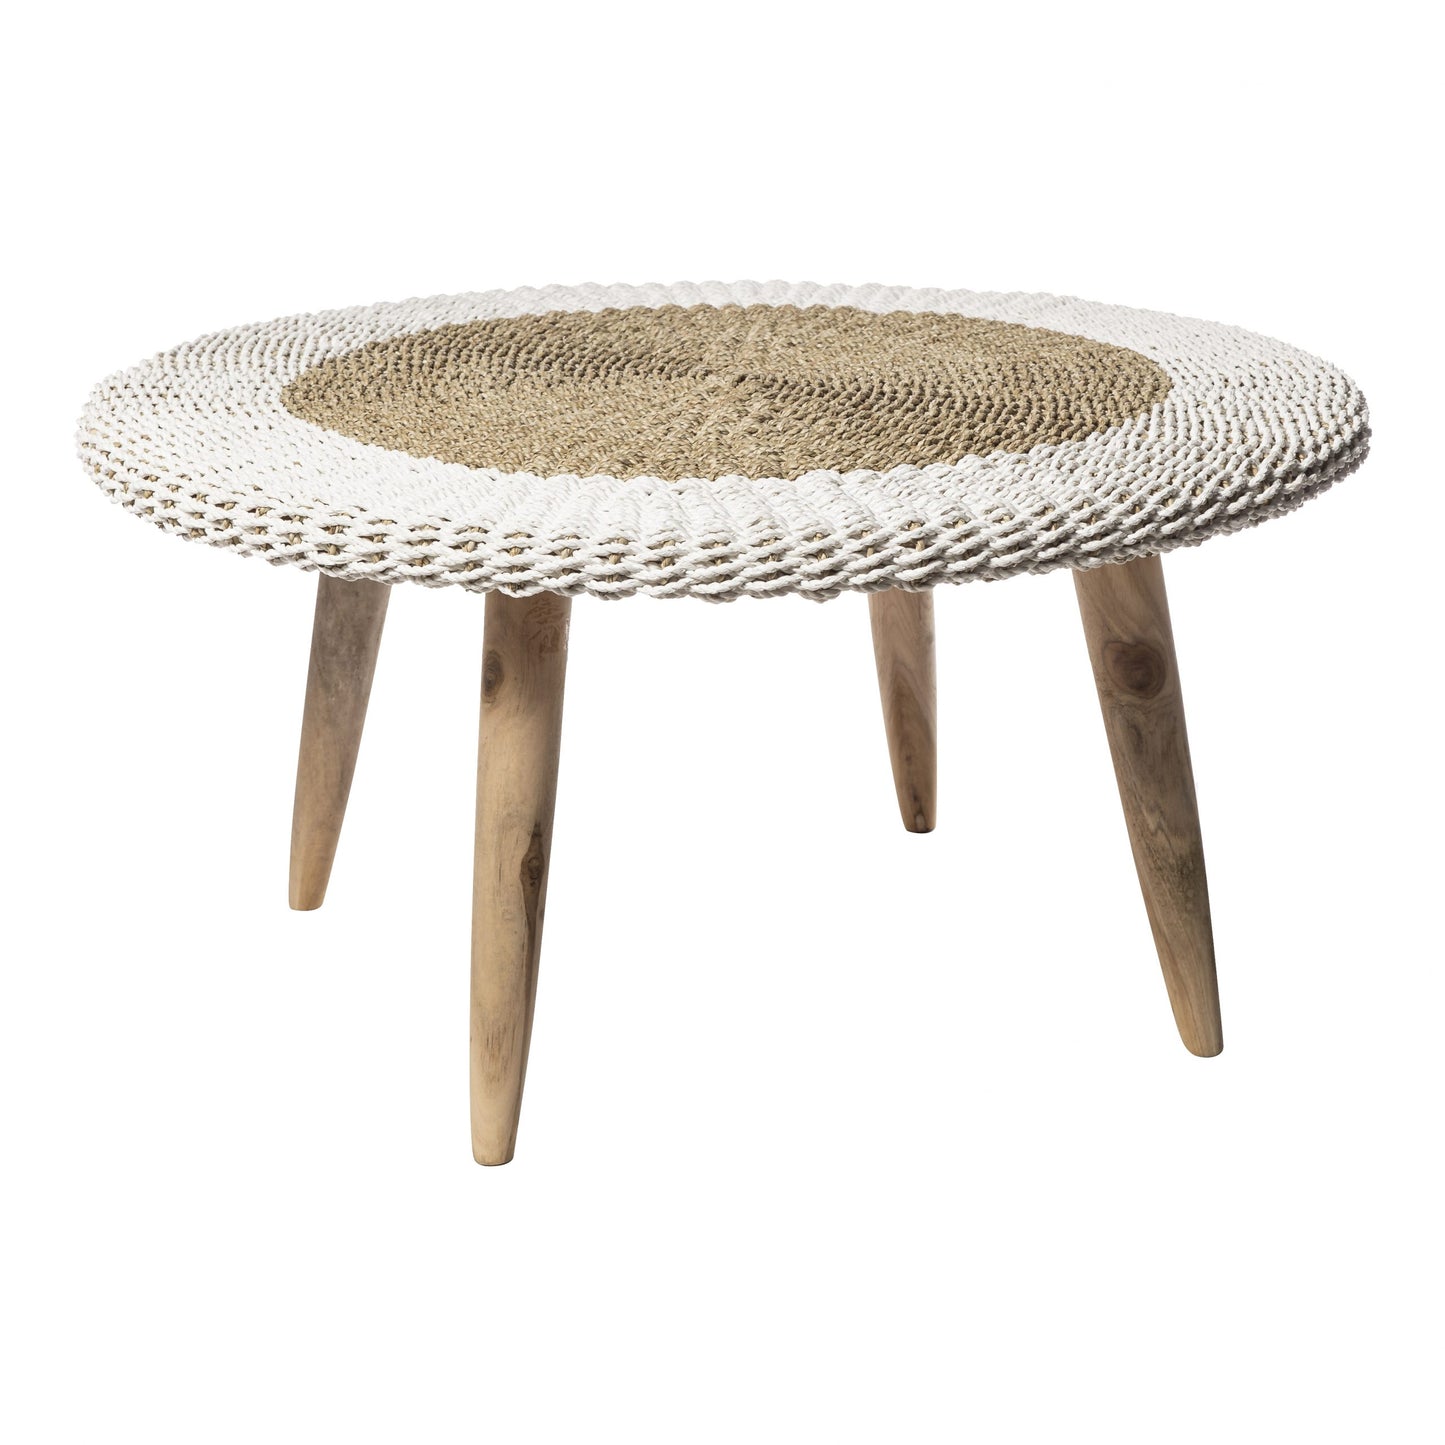 SEAGRASS TABLE